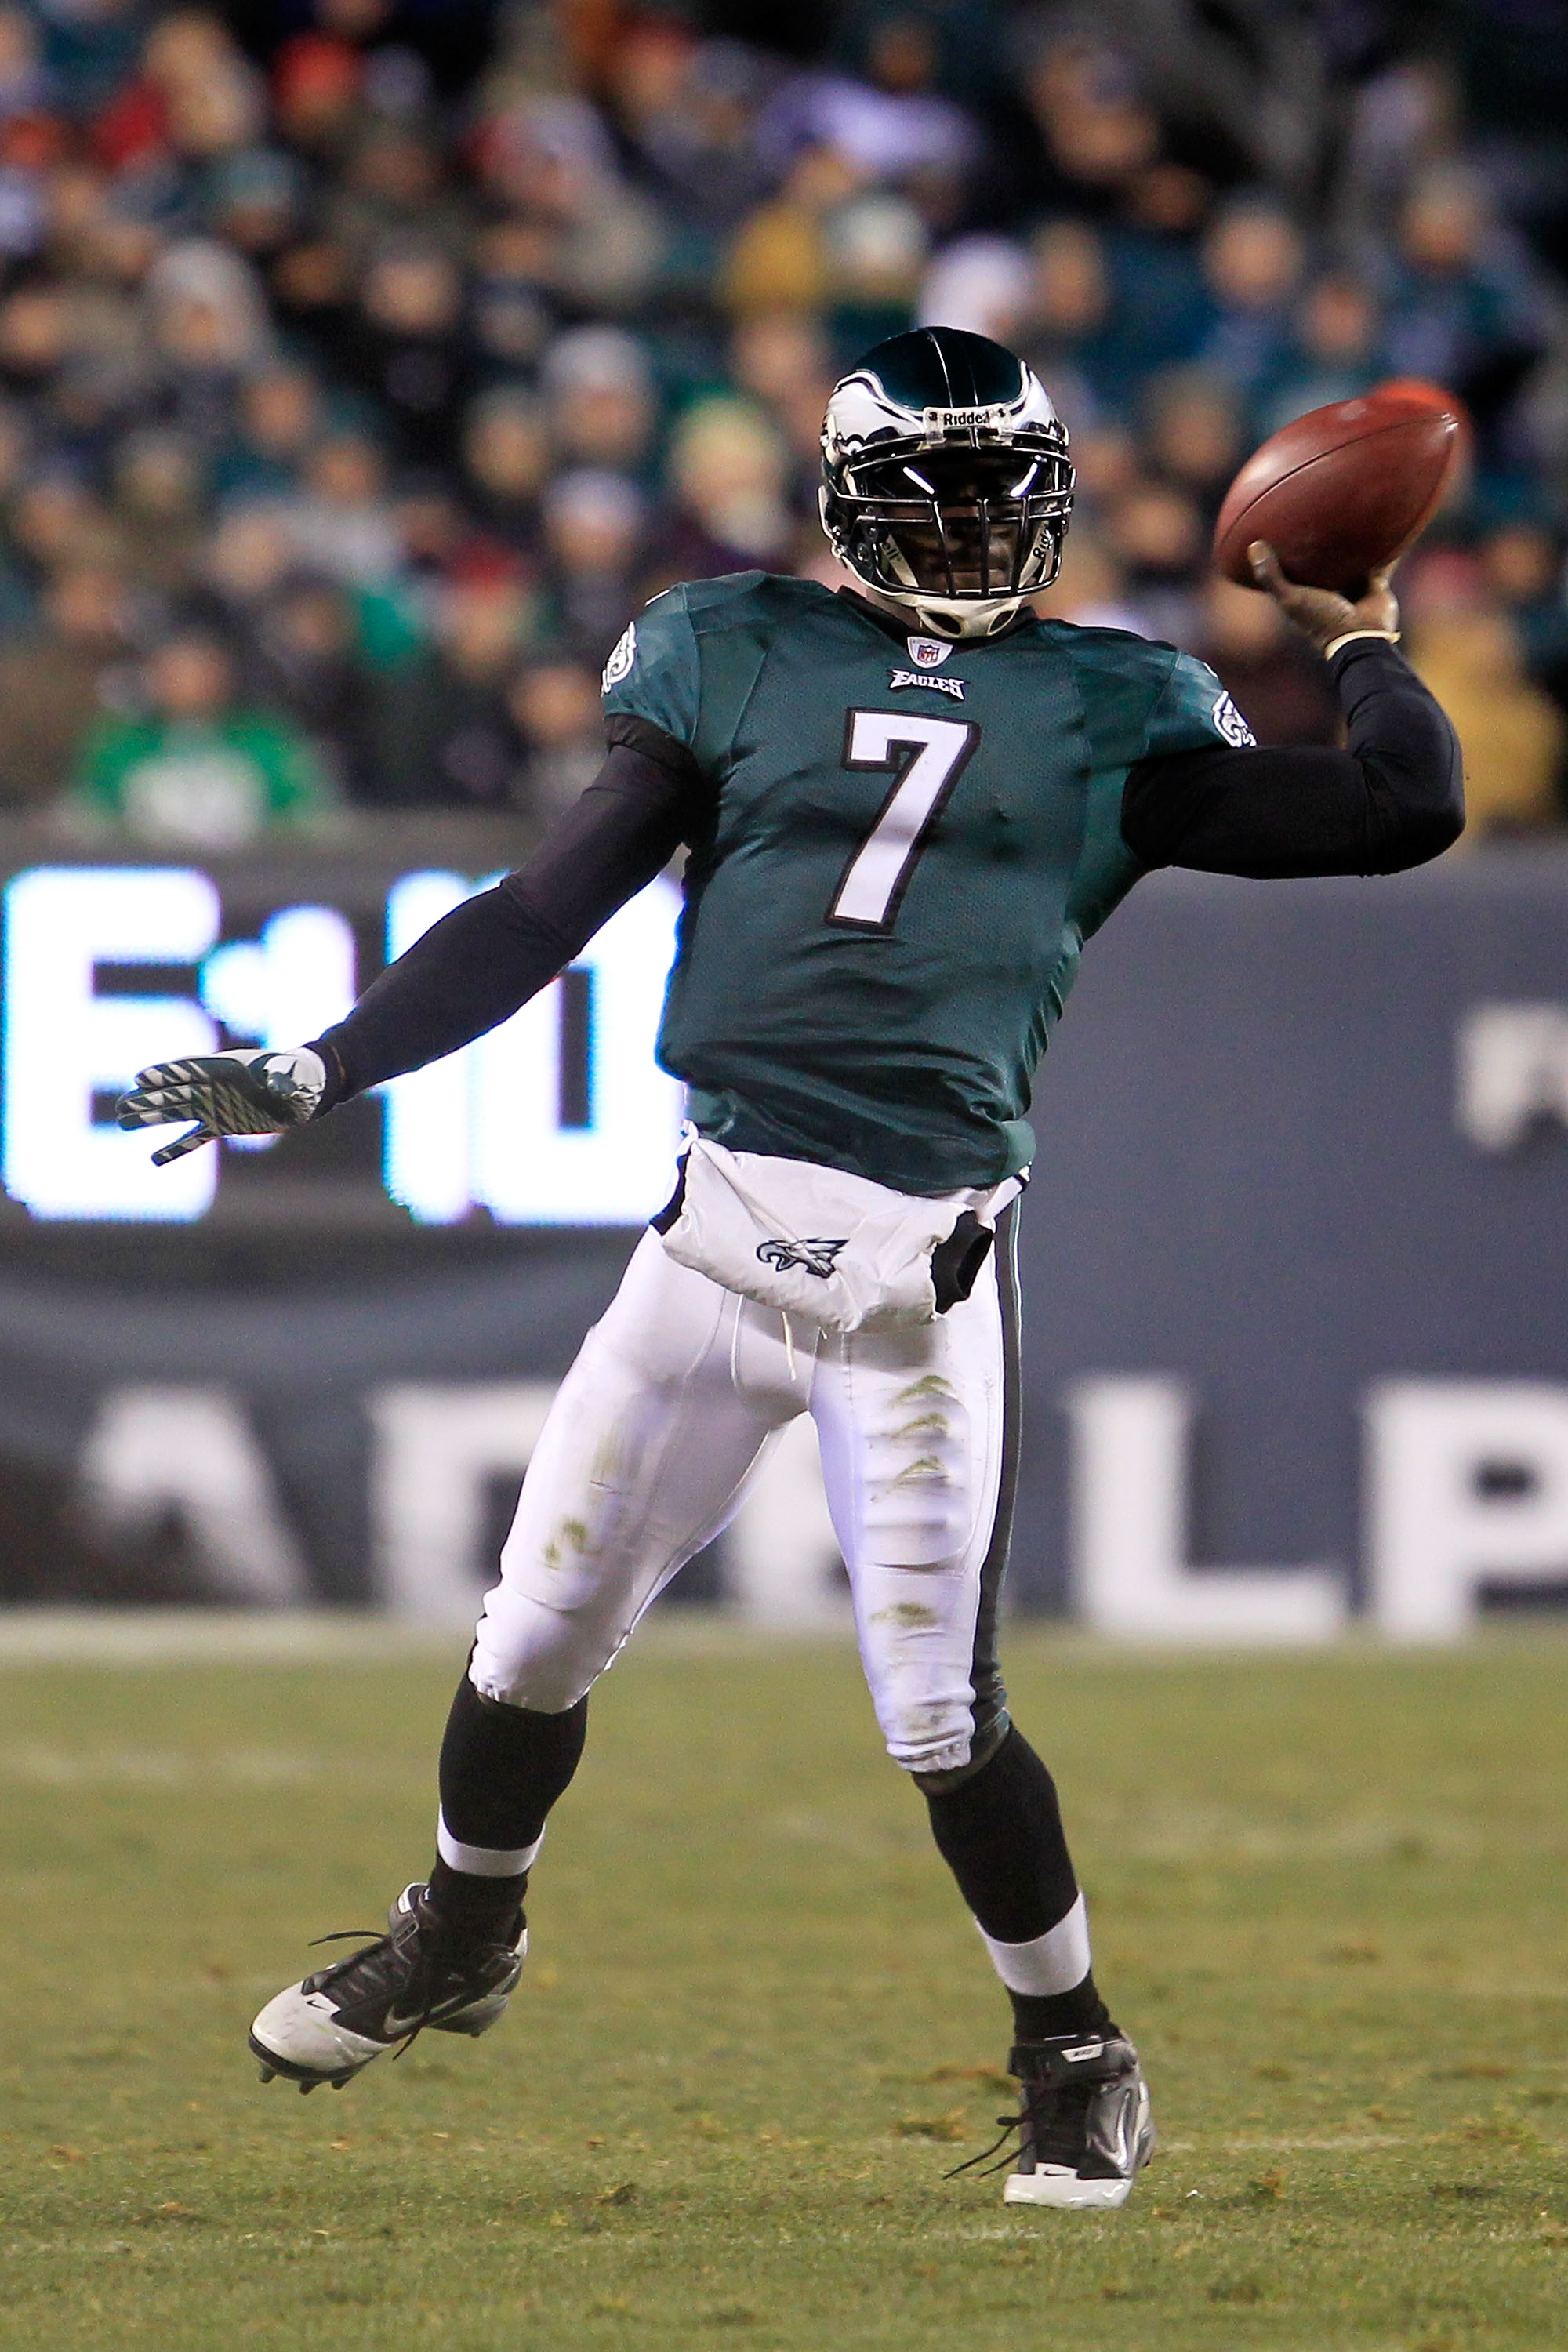 What Michael Vick meant on the field and off